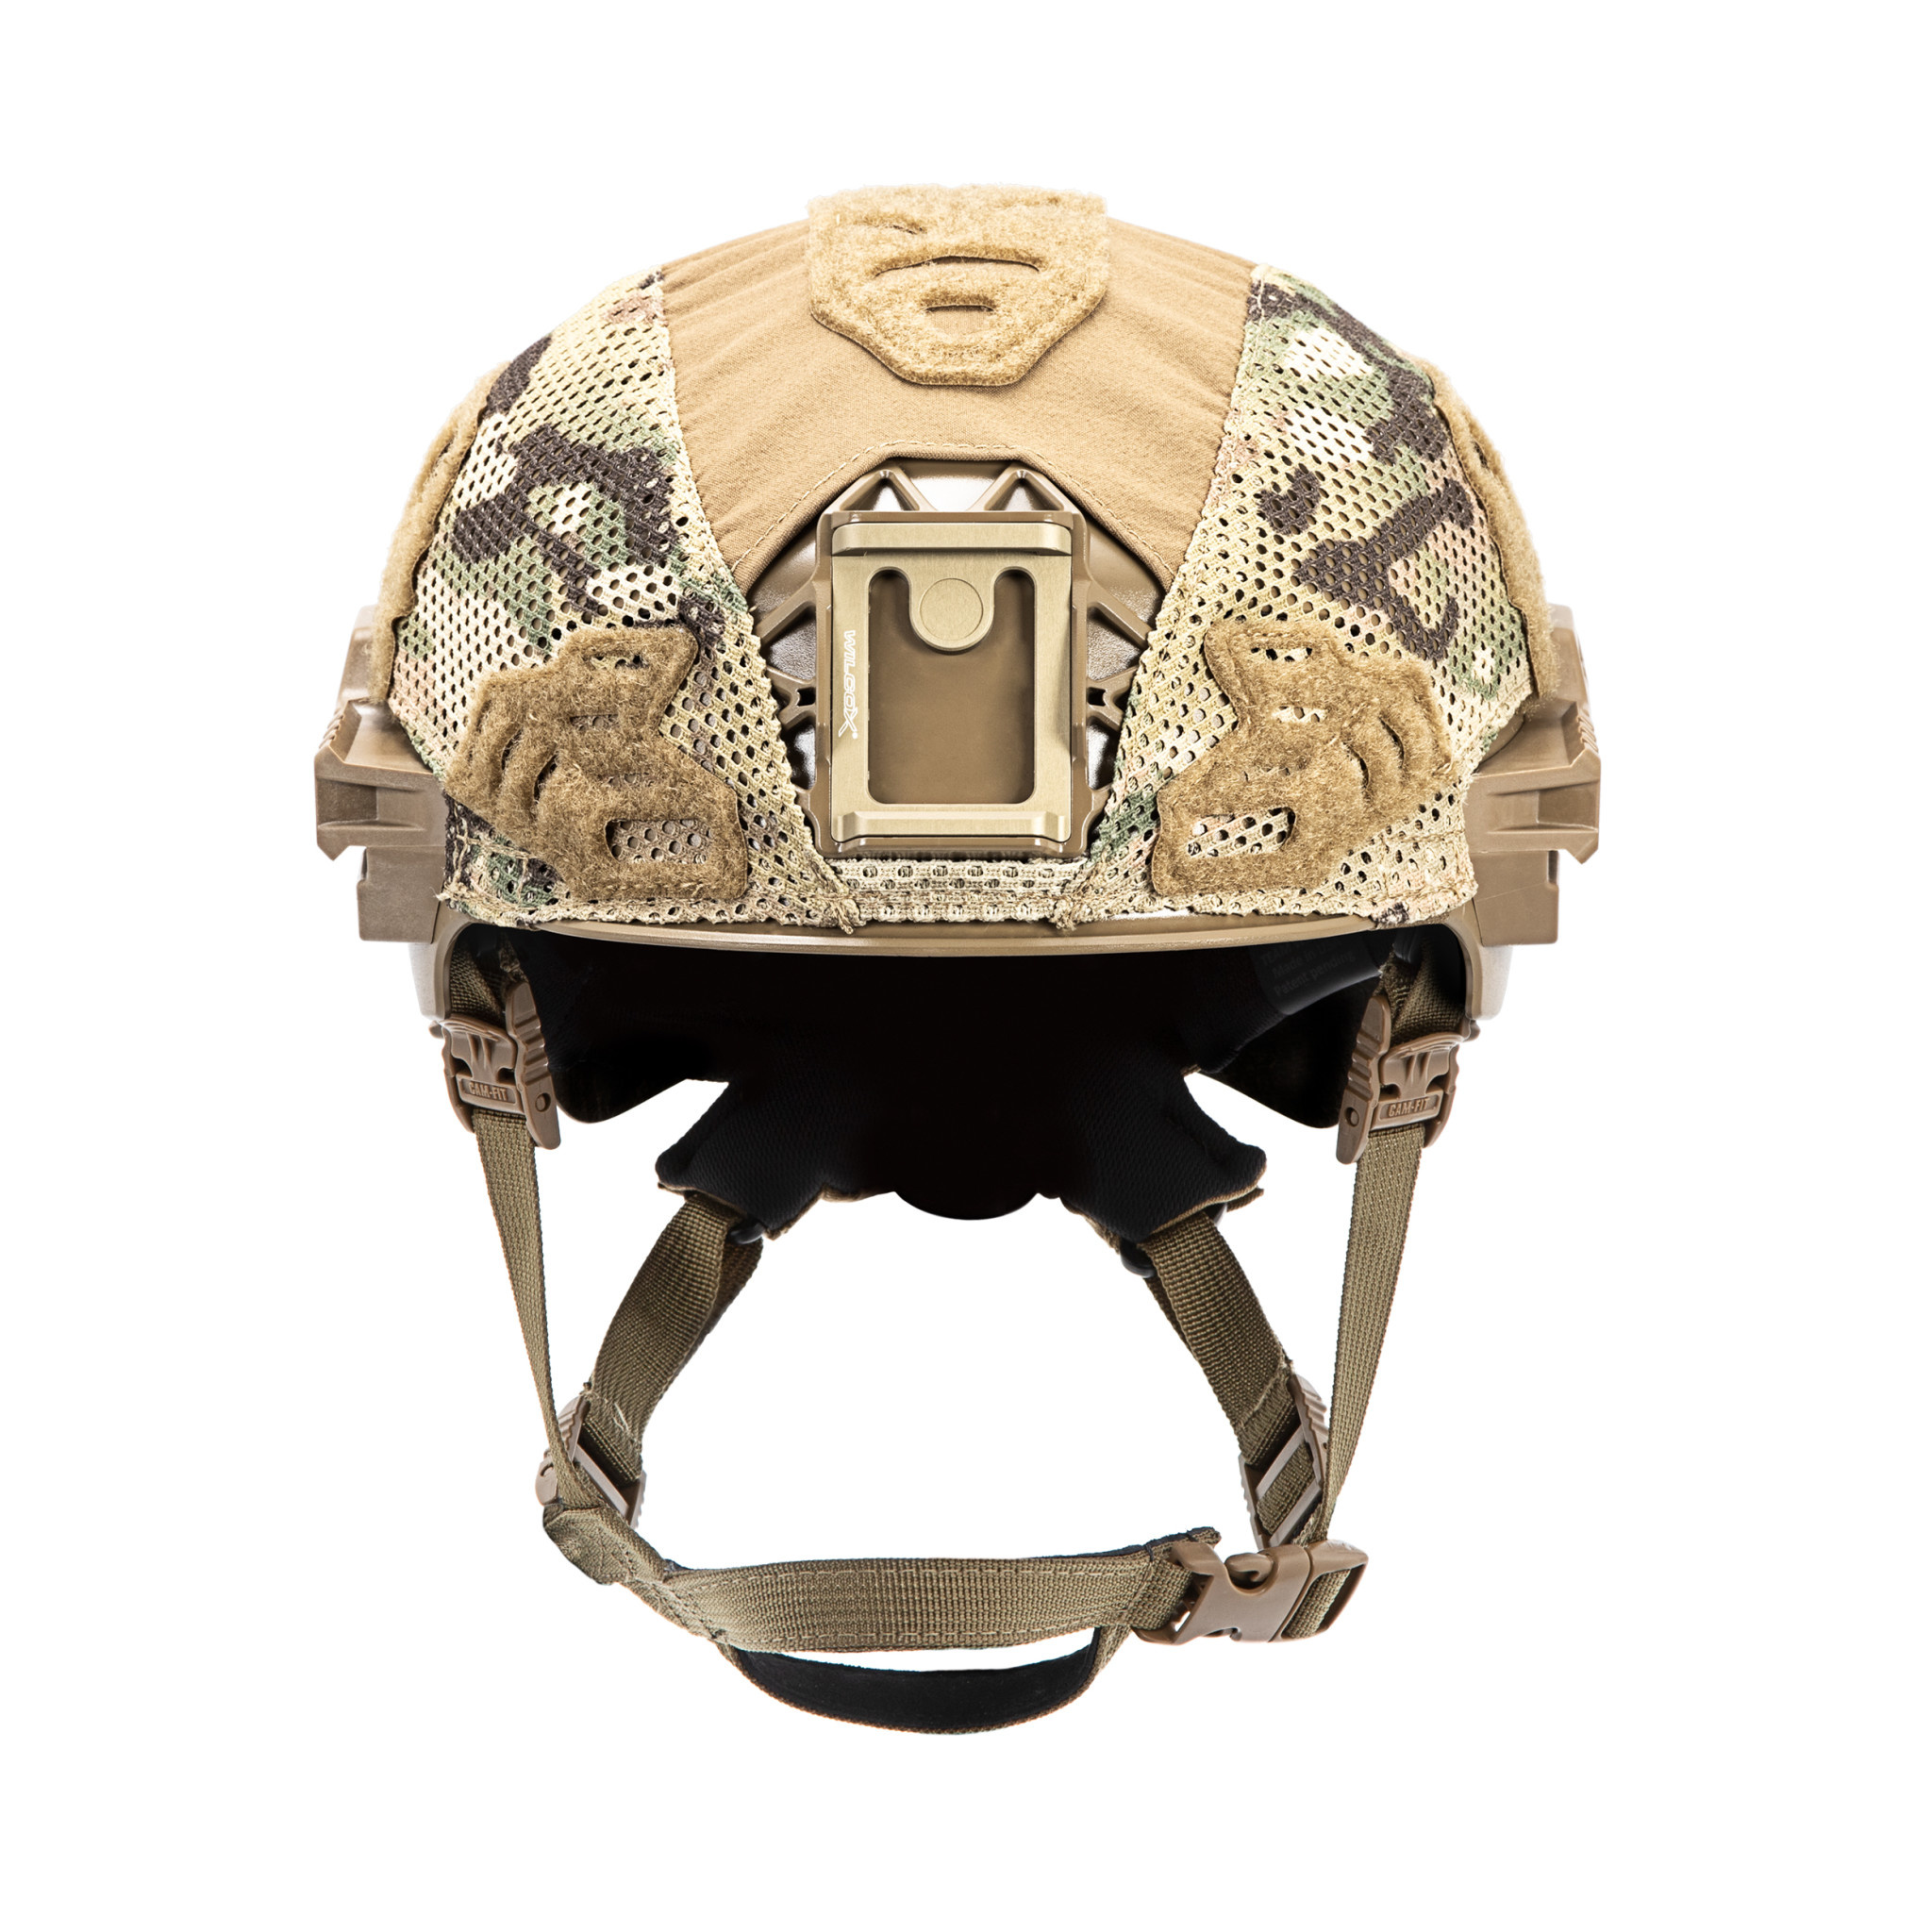 Team Wendy Helmet Cover Multicam for EXFIL® LTP (Fits Both Sizes) with Rail 3.0